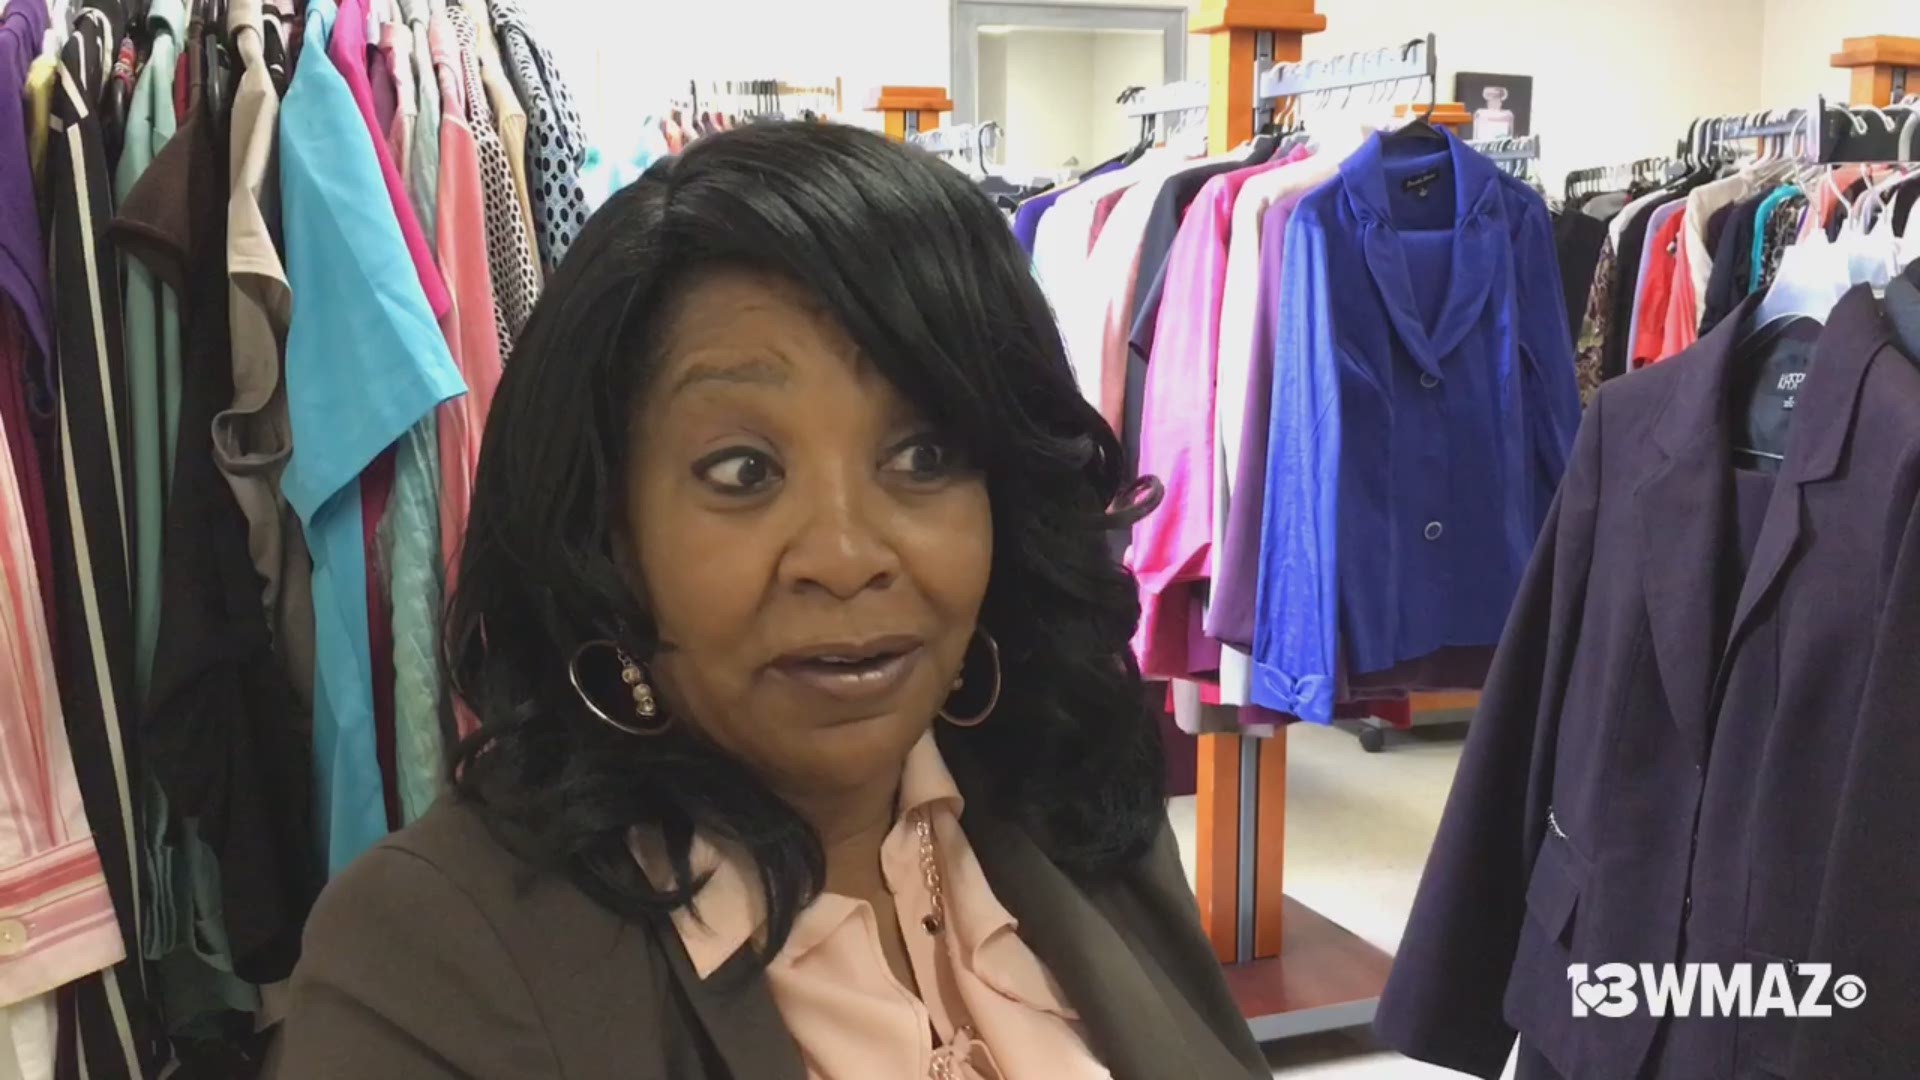 The closet is open to anyone in need of clothing in Houston County who can prove that they have an interview or job they need the clothes for.